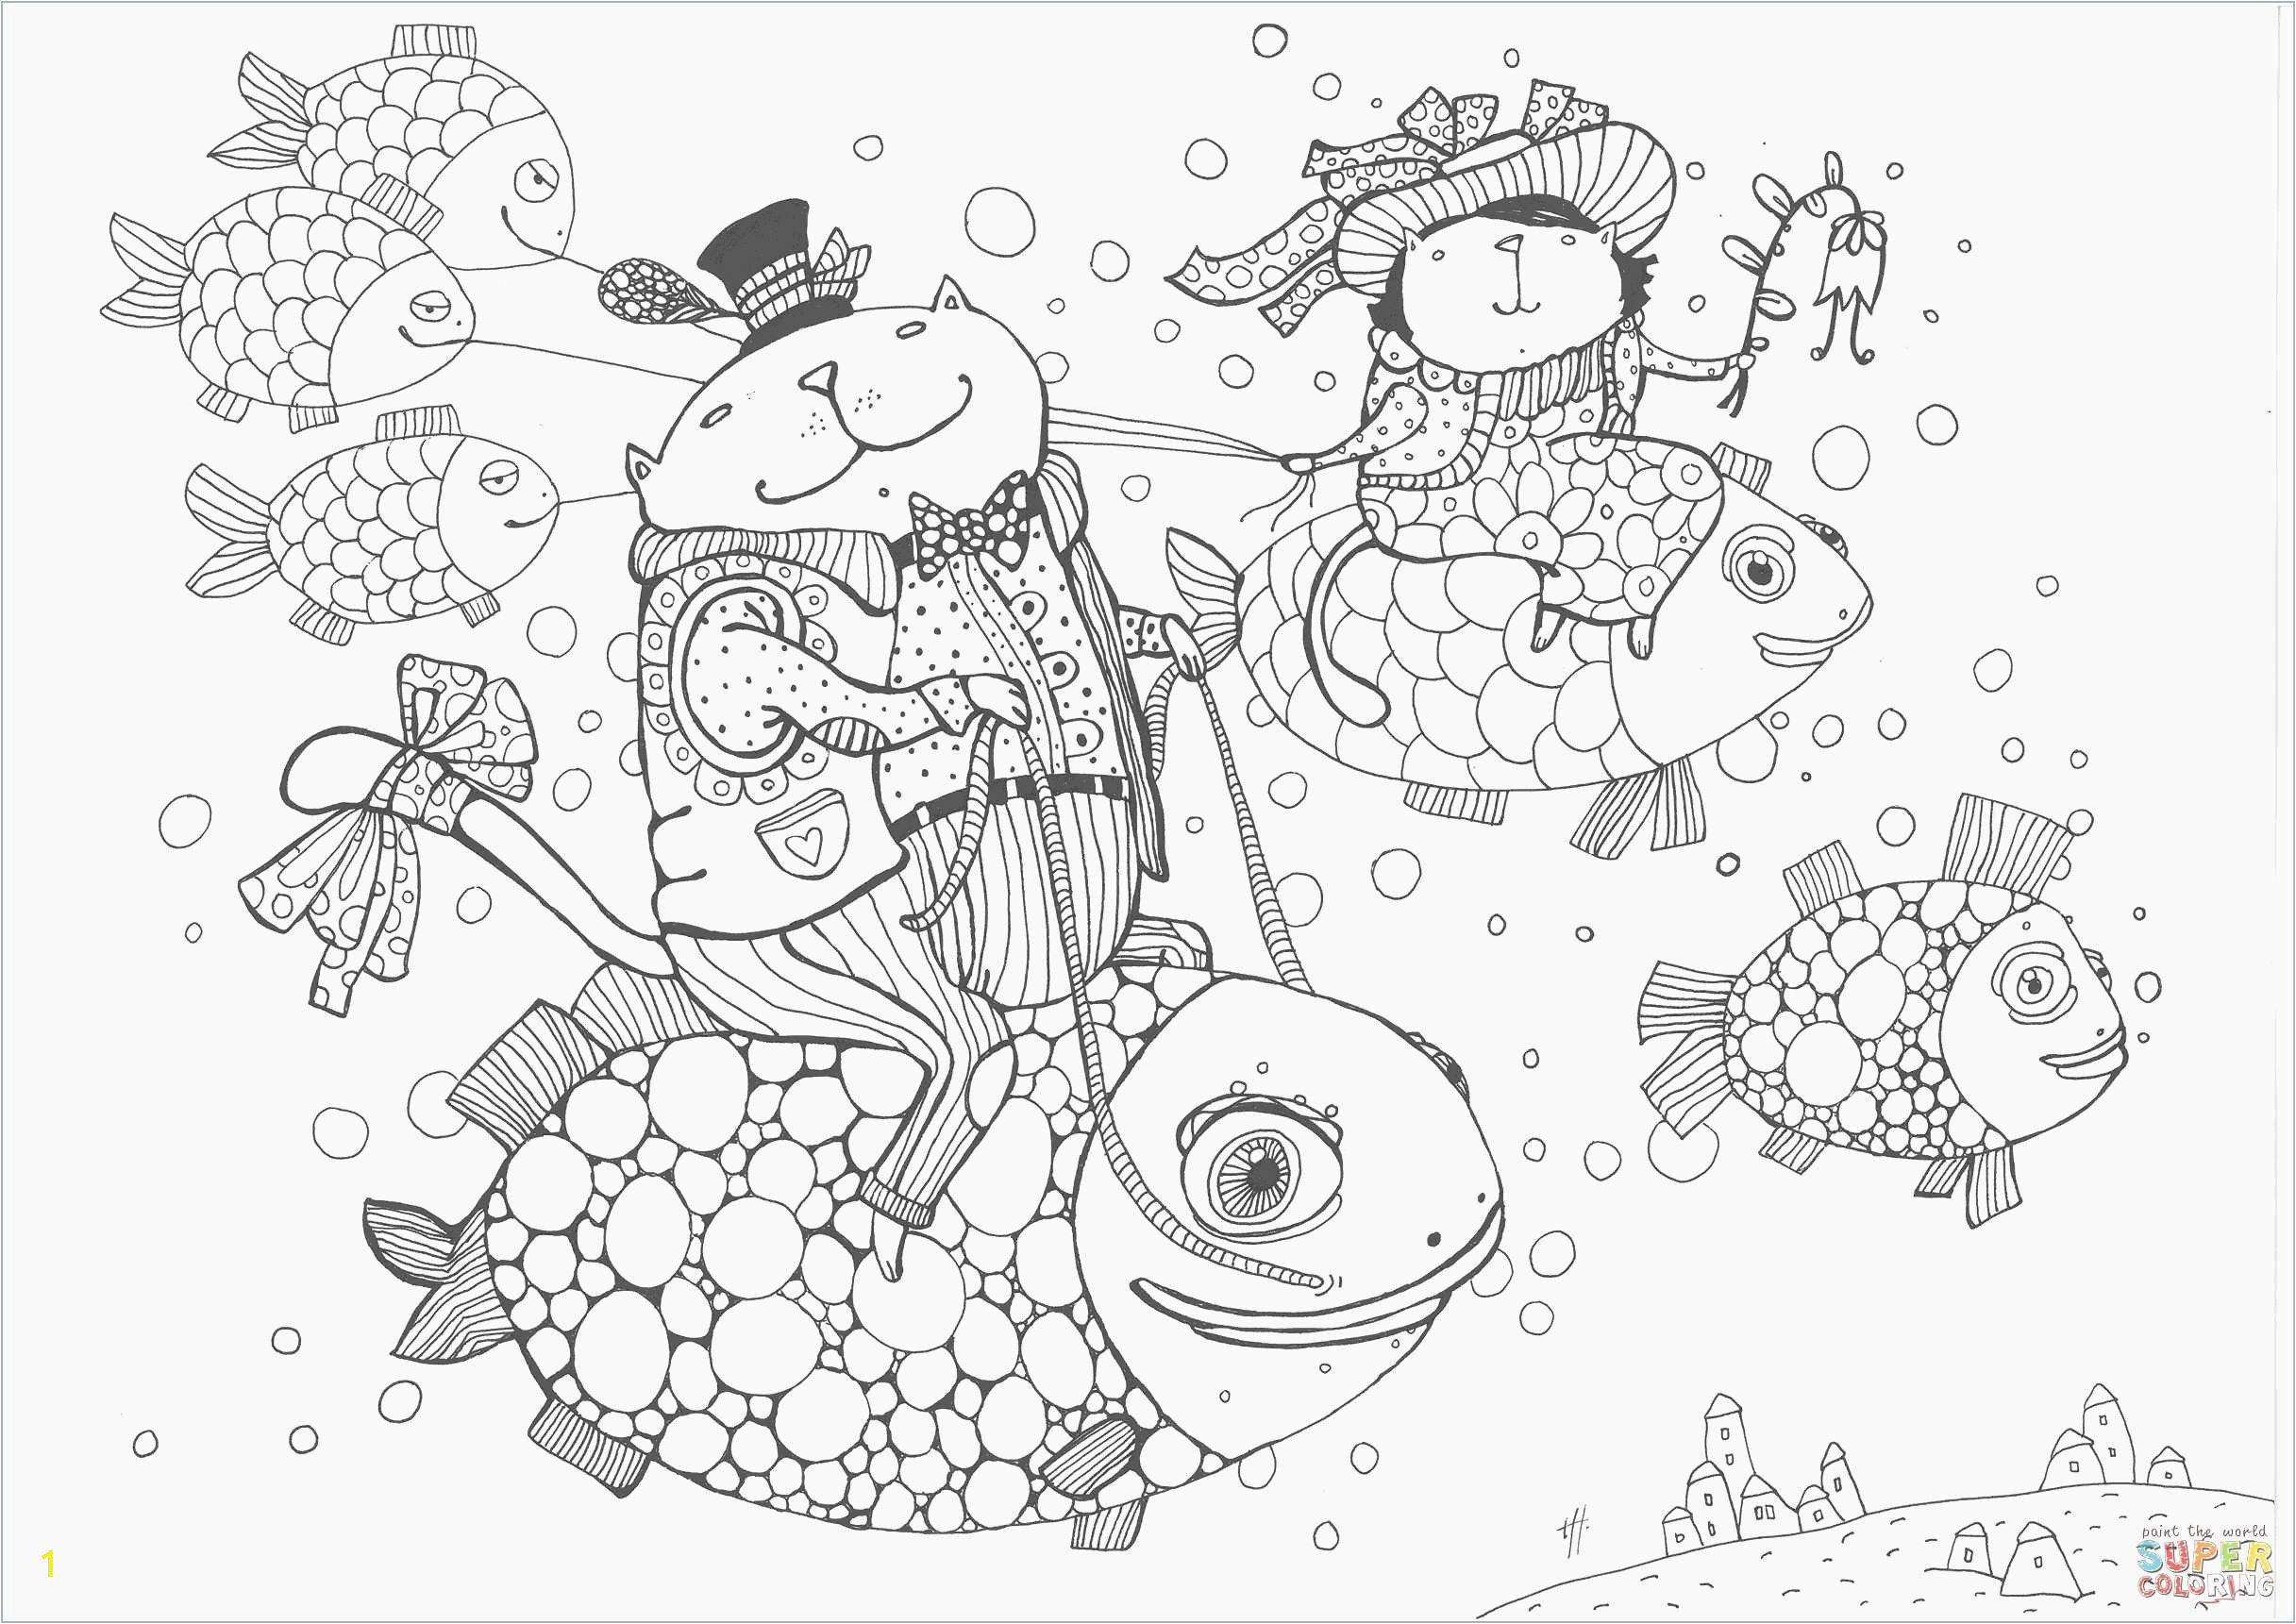 Free Printable Pokemon Coloring Pages Printable Coloring Pages for Kids Prettier Free Coloring Pages to